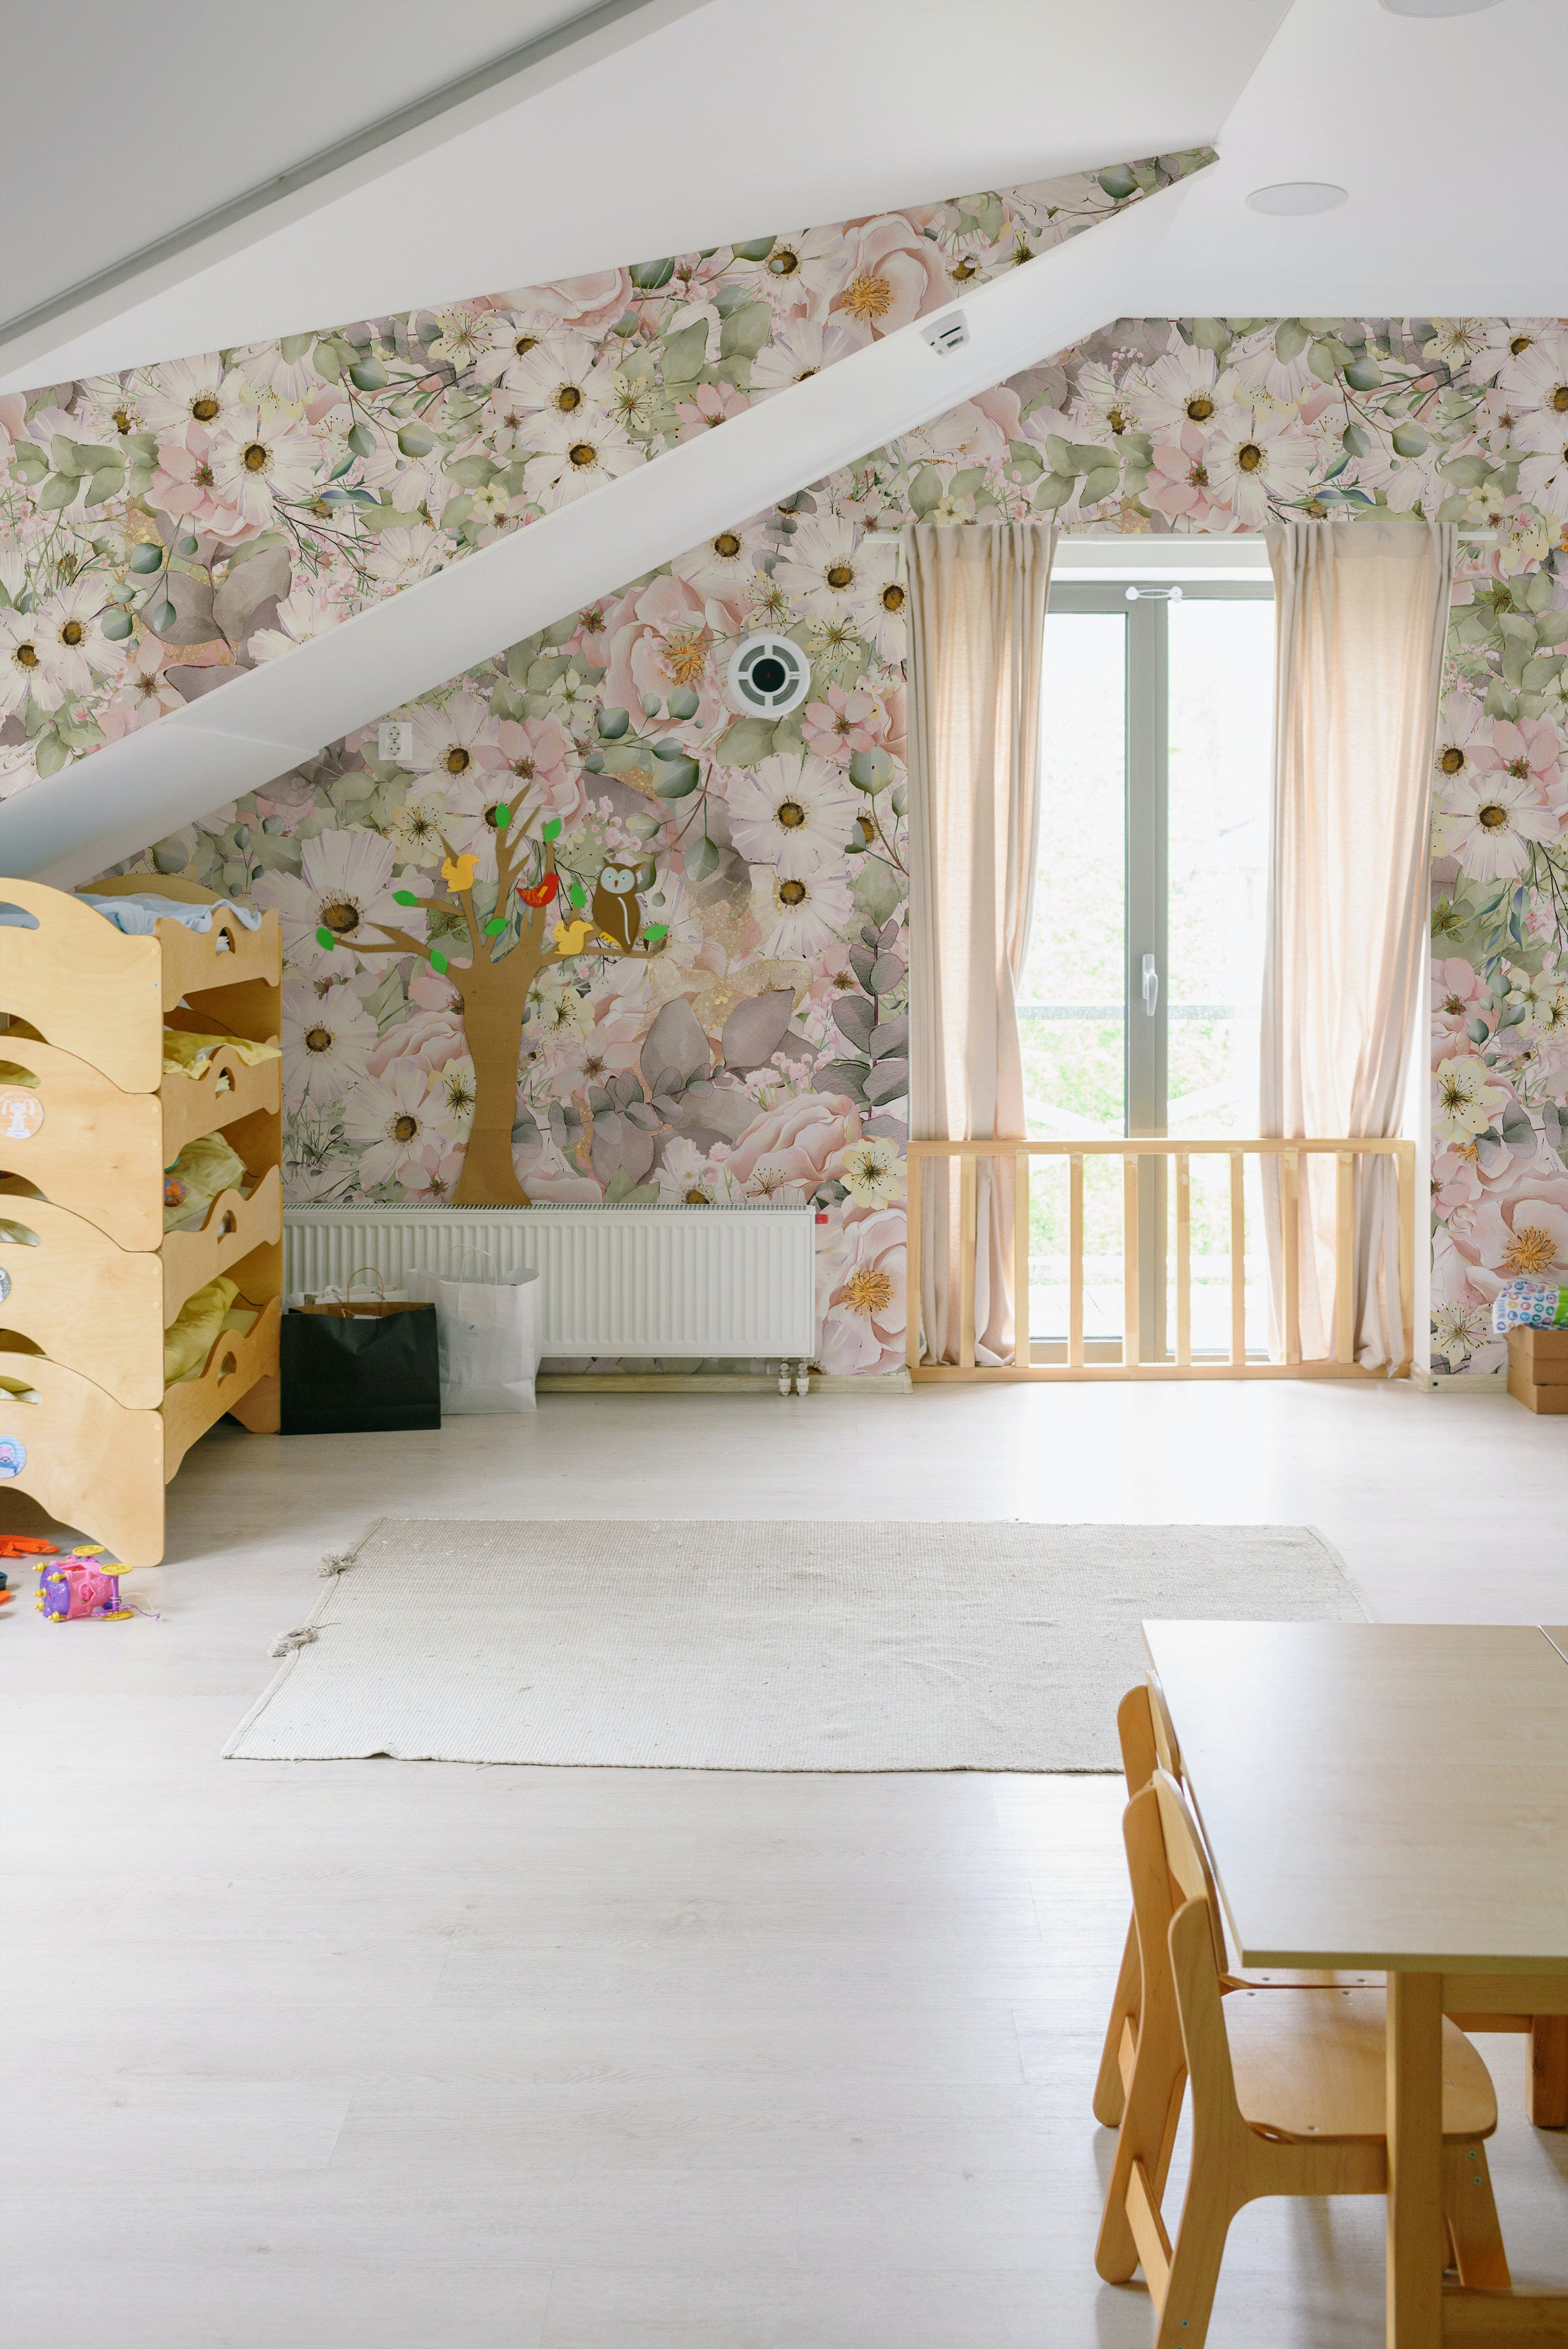 A spacious room adorned with Pink Fleur Wallpaper - 75" on the sloped ceiling and walls, creating a bright and floral ambiance. The wallpaper's detailed pink flowers and greenery complement the natural light entering through the windows